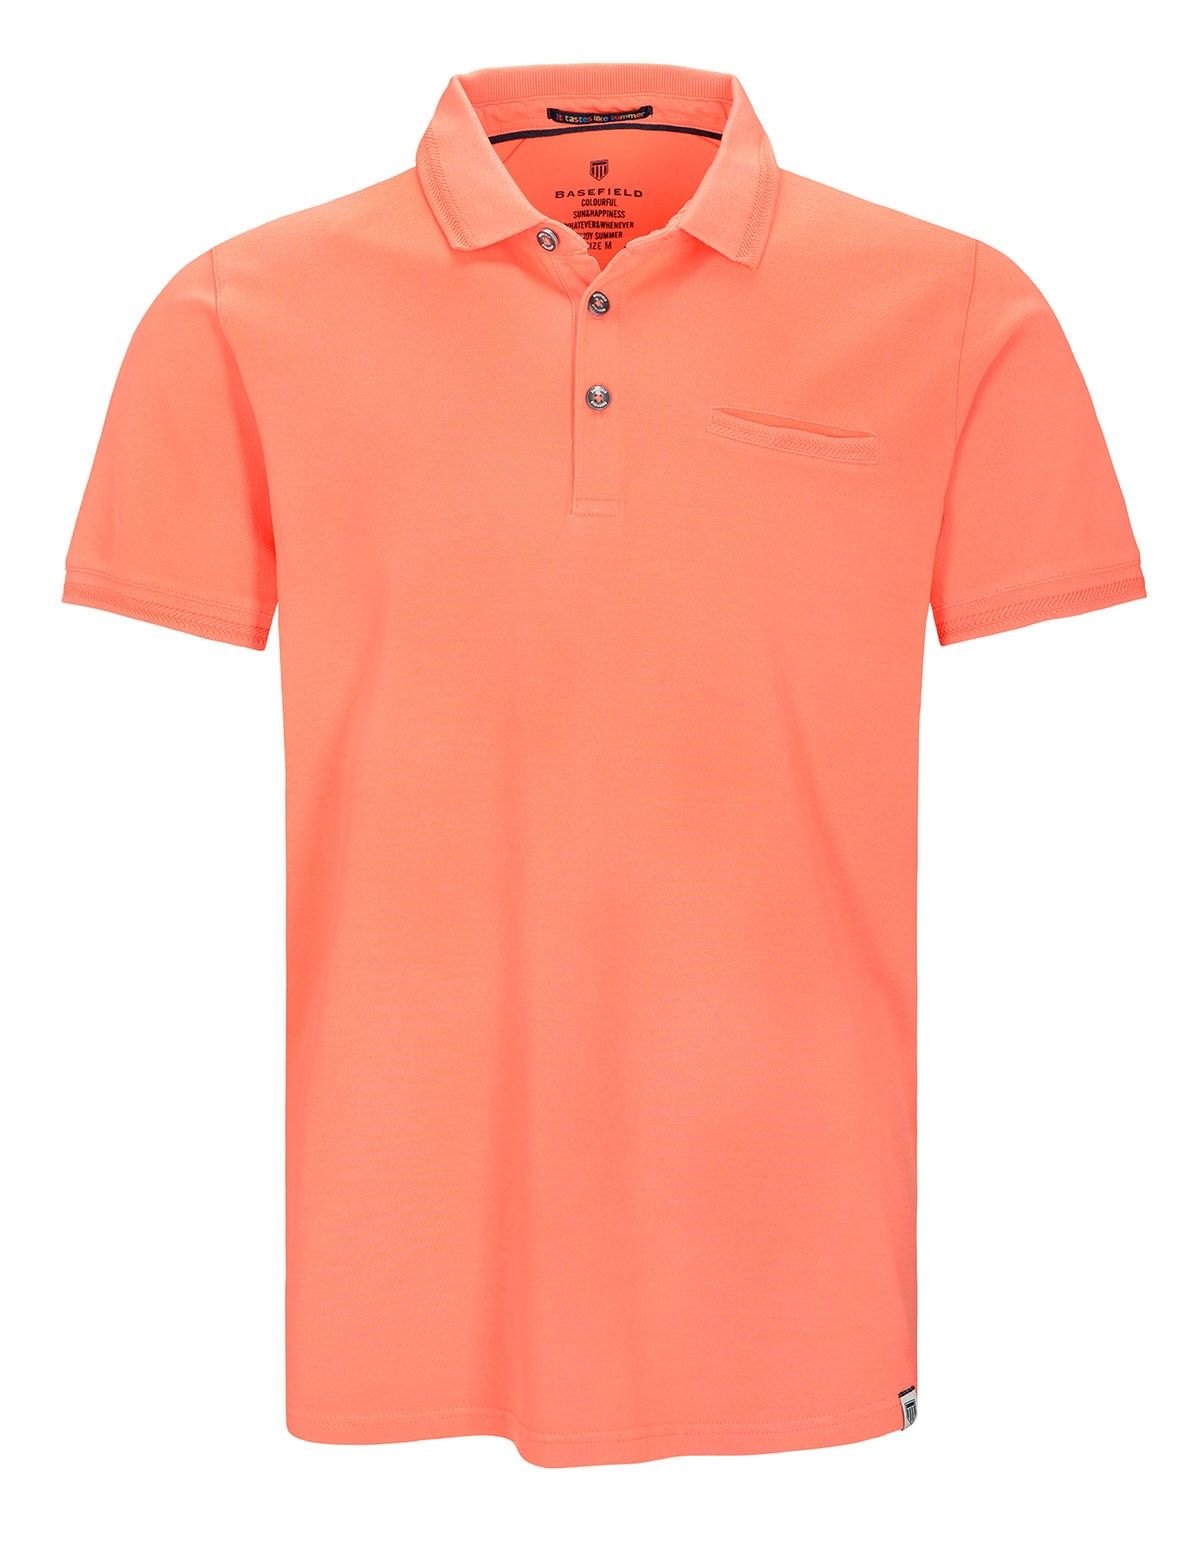 Polo Shirt mit Struktur-Muster